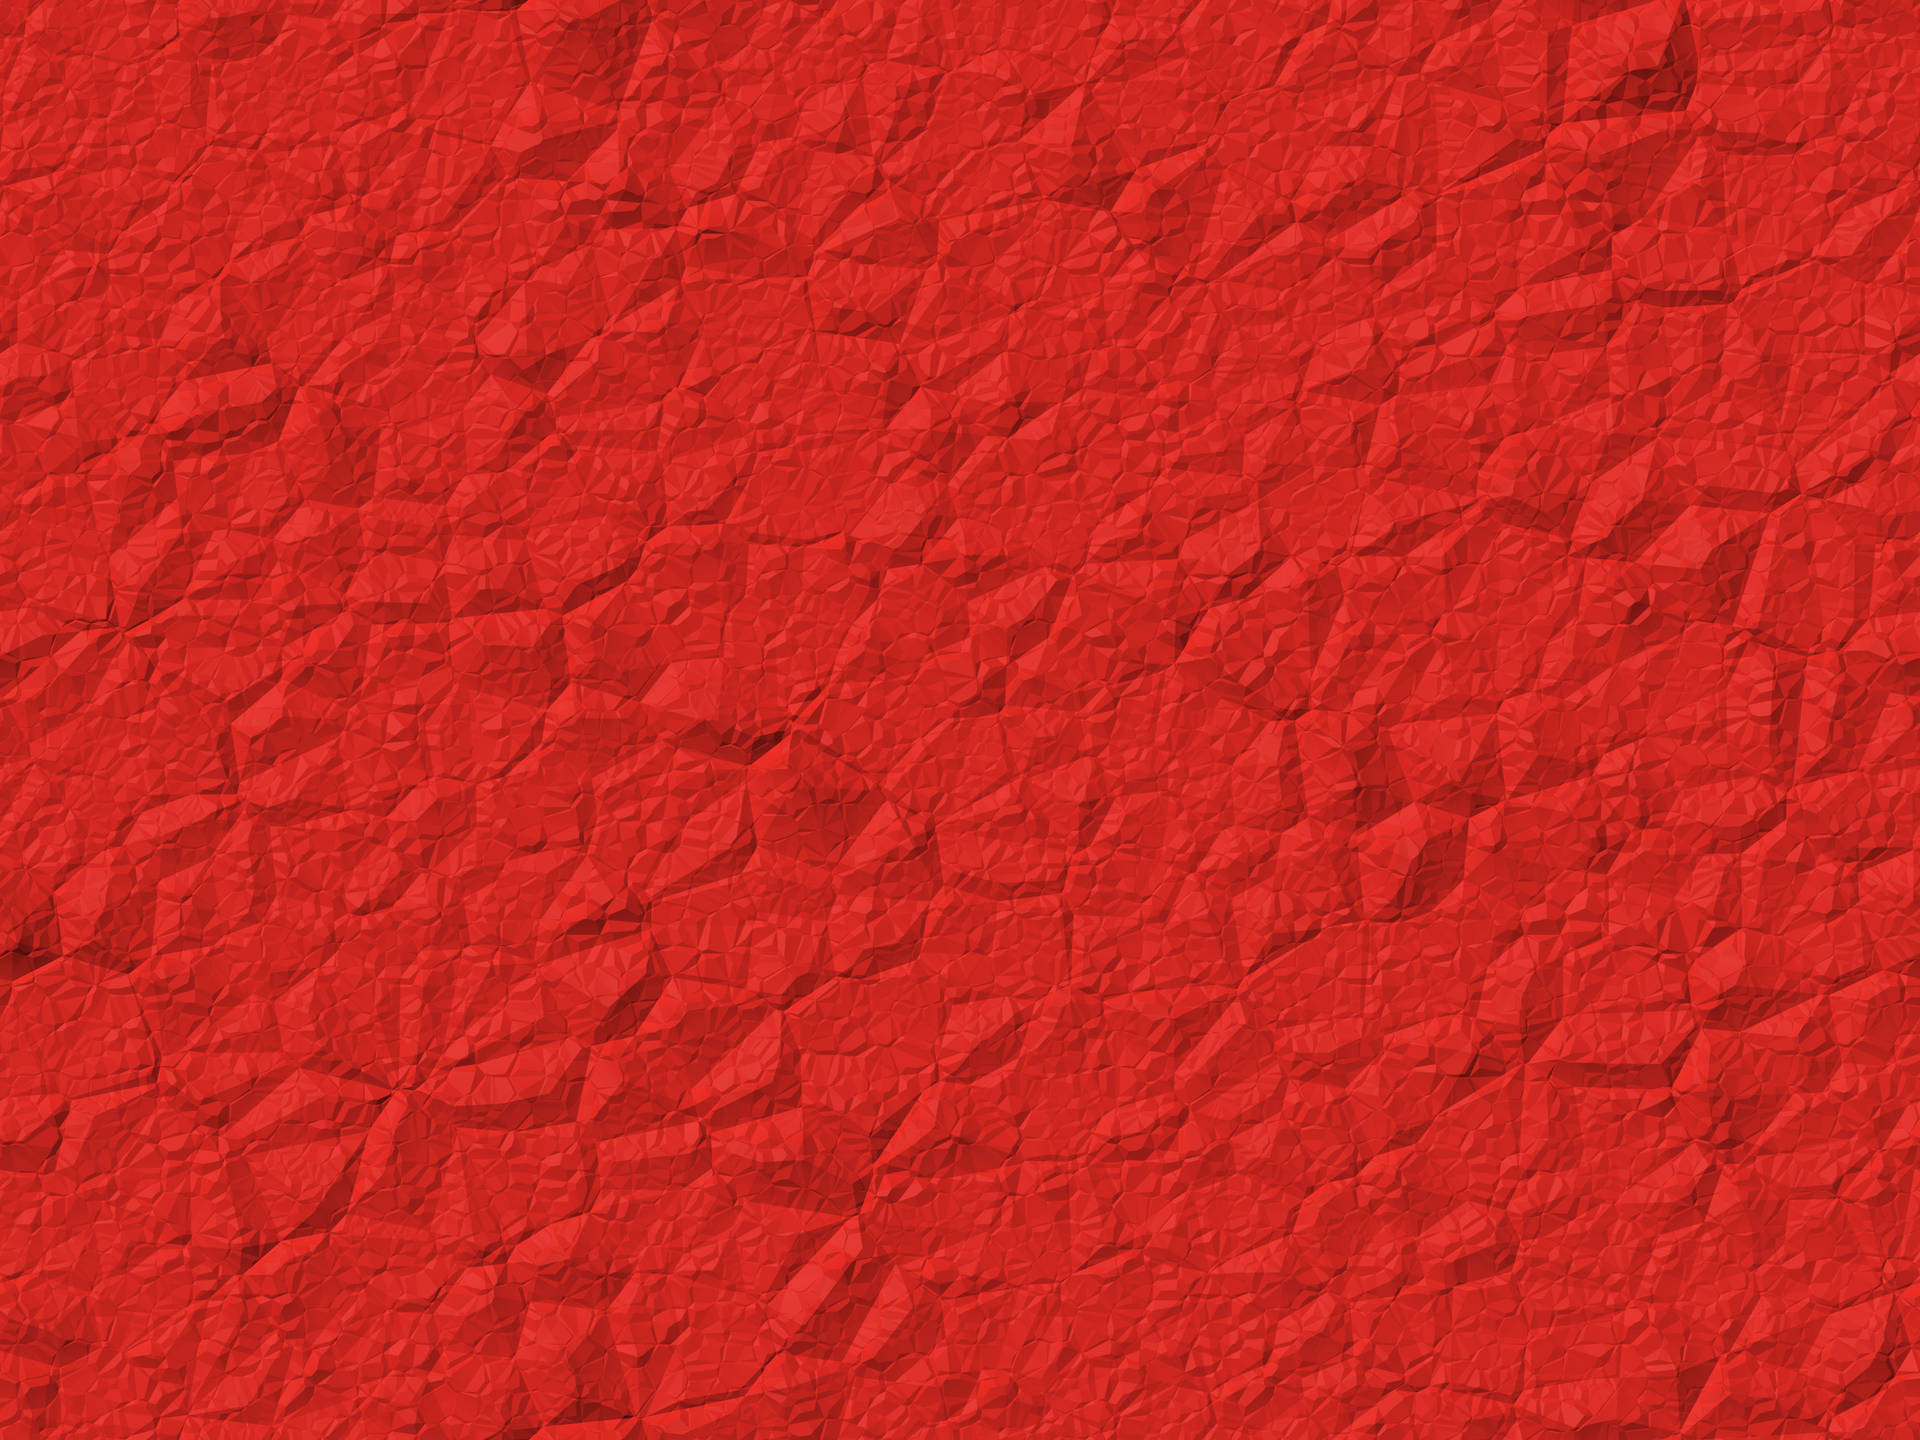 Red 4k Uhd Crumpled Paper Background